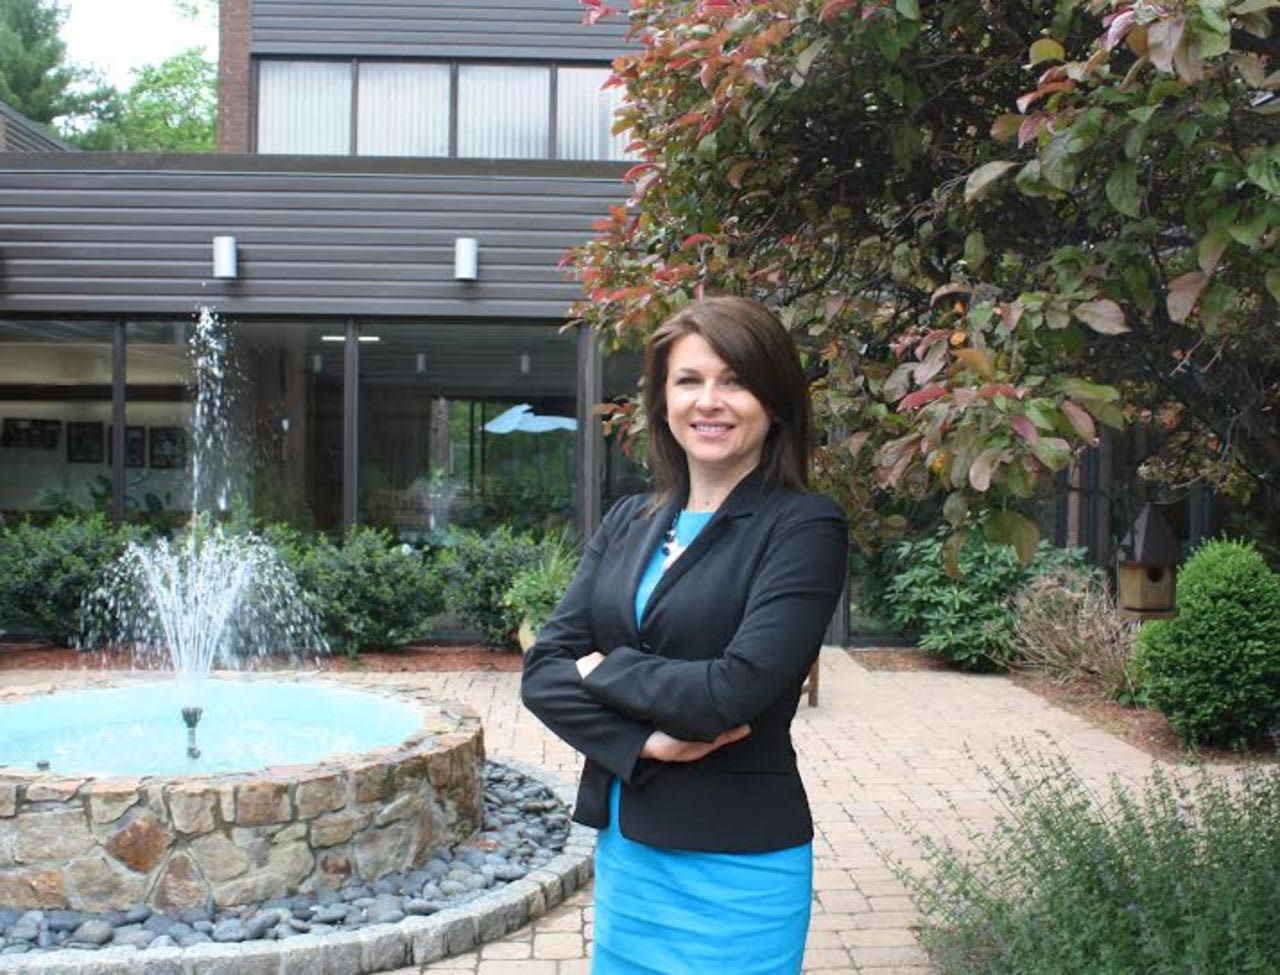 Renata Plonski has been named Director of Services for Waveny at Home in New Canaan.